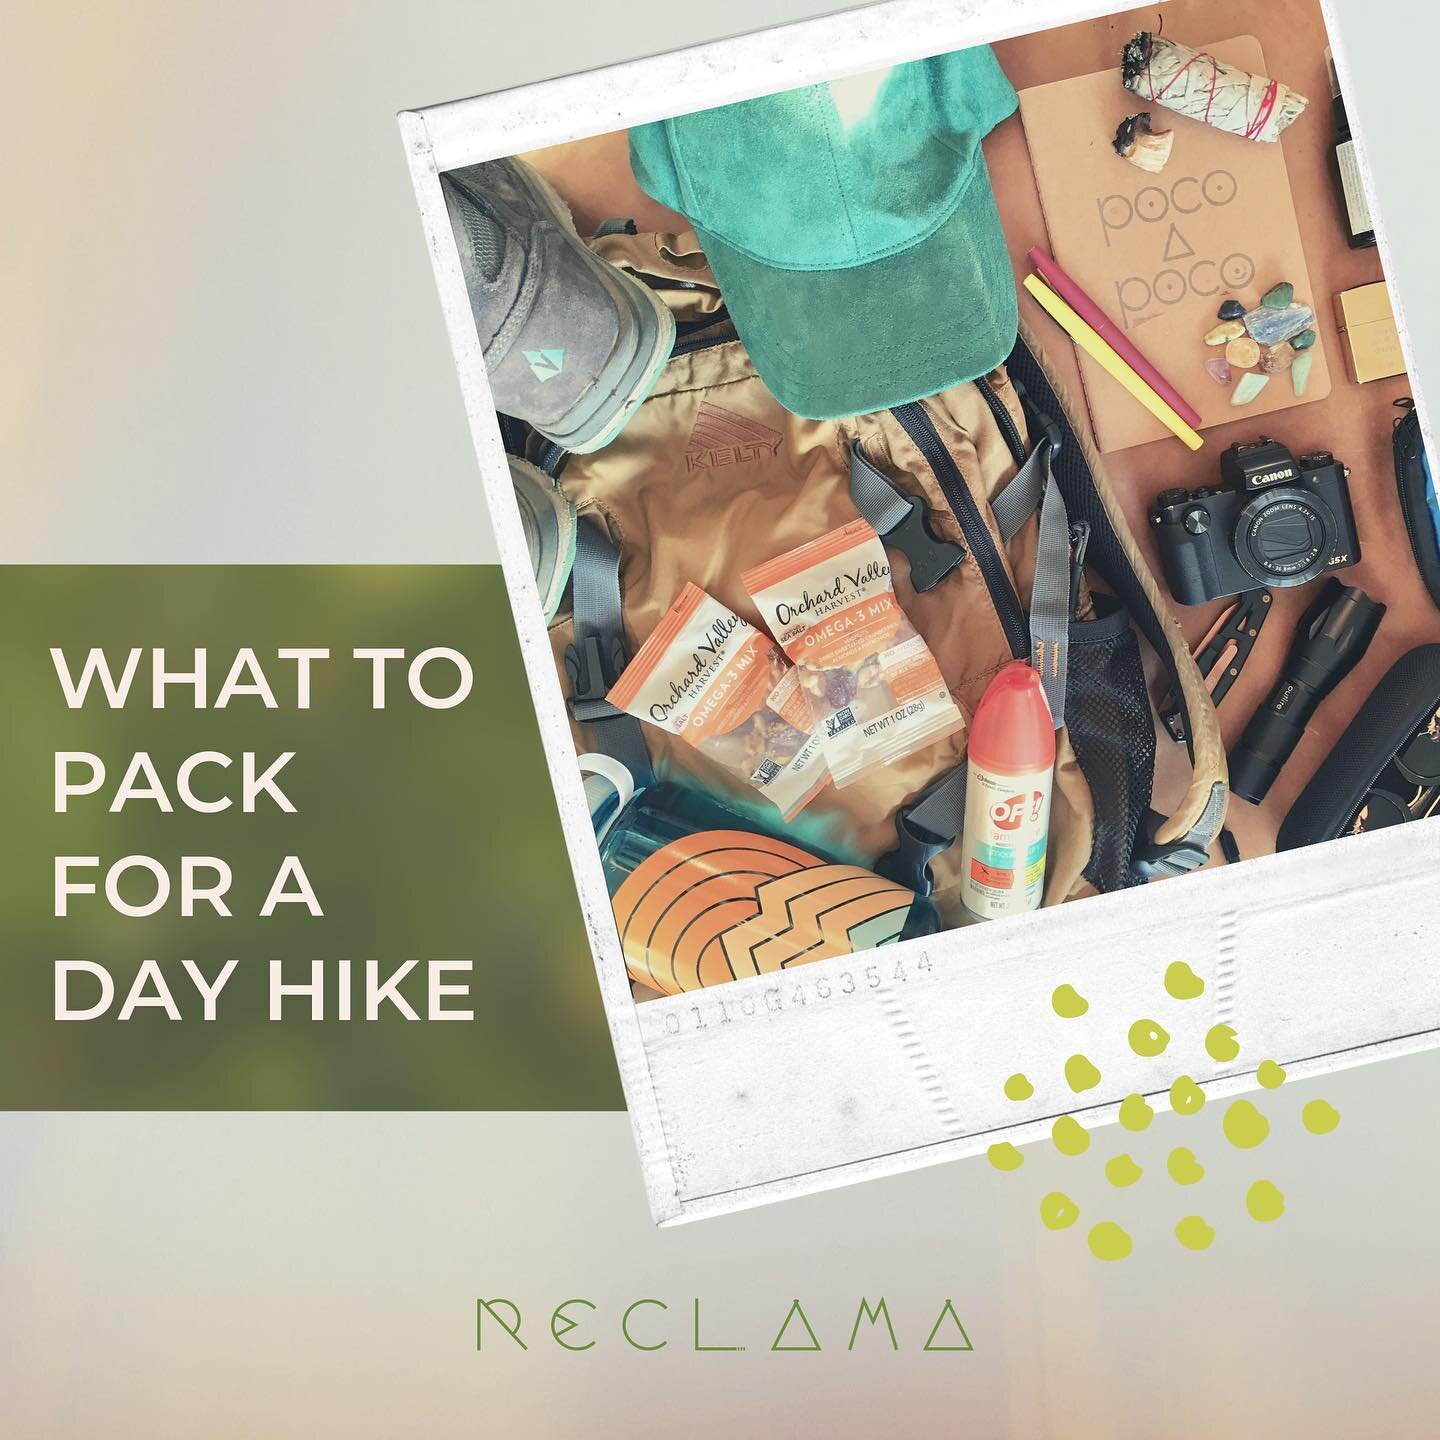 What to pack in your hiking bag when you need the essentials but also need to spiritually connect with nature is what this should be called&hellip; 🥾🔮✍🏽

Because we don&rsquo;t hike like everyone else and that&rsquo;s more than okay 🥾 Here, it&rs